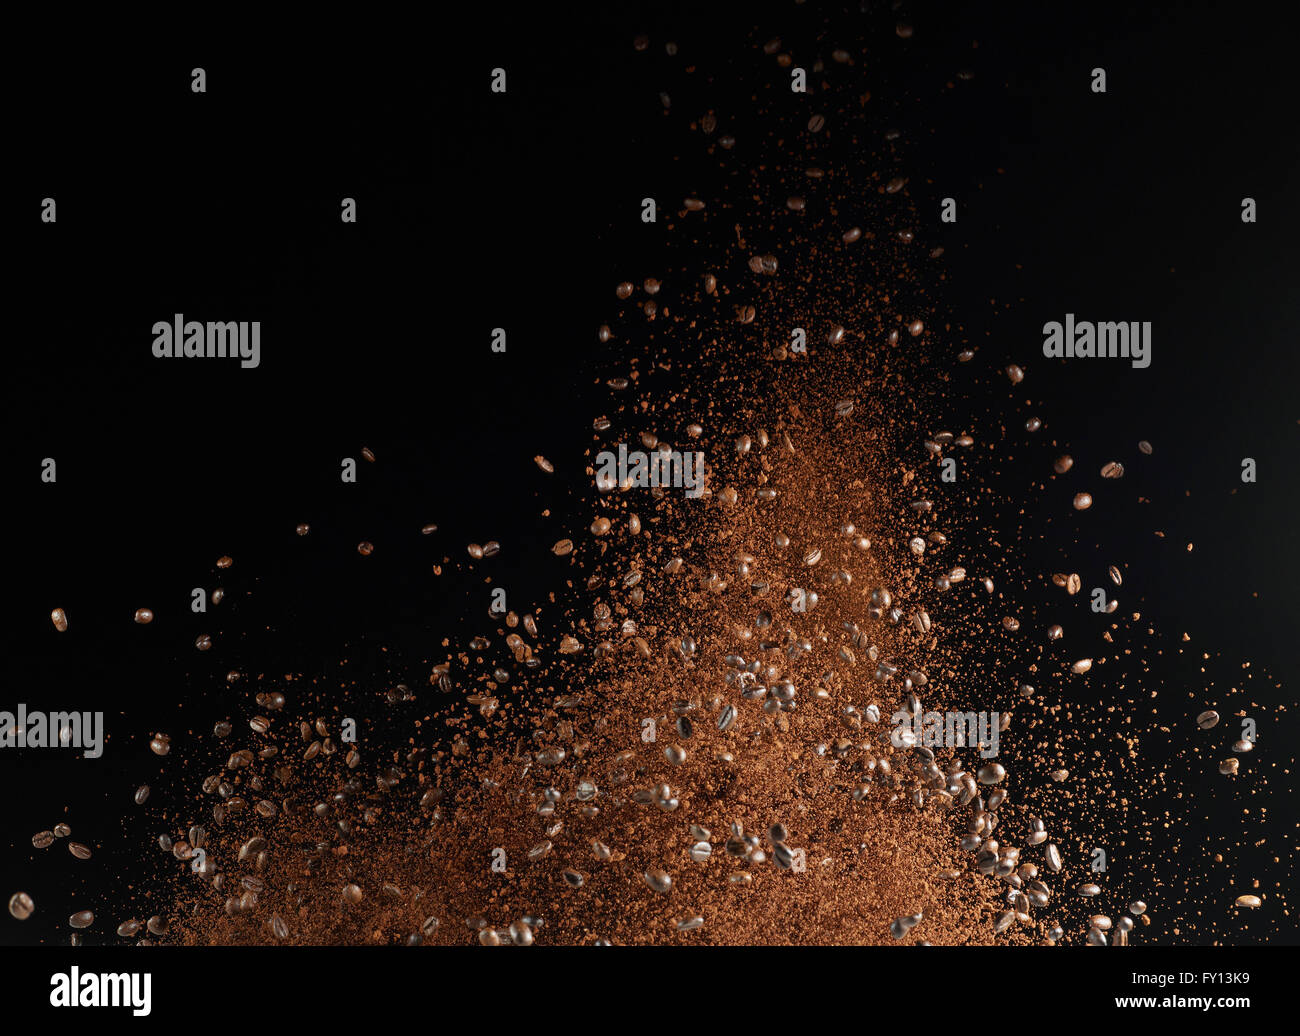 Ground coffee beans in mid-air against black background Stock Photo